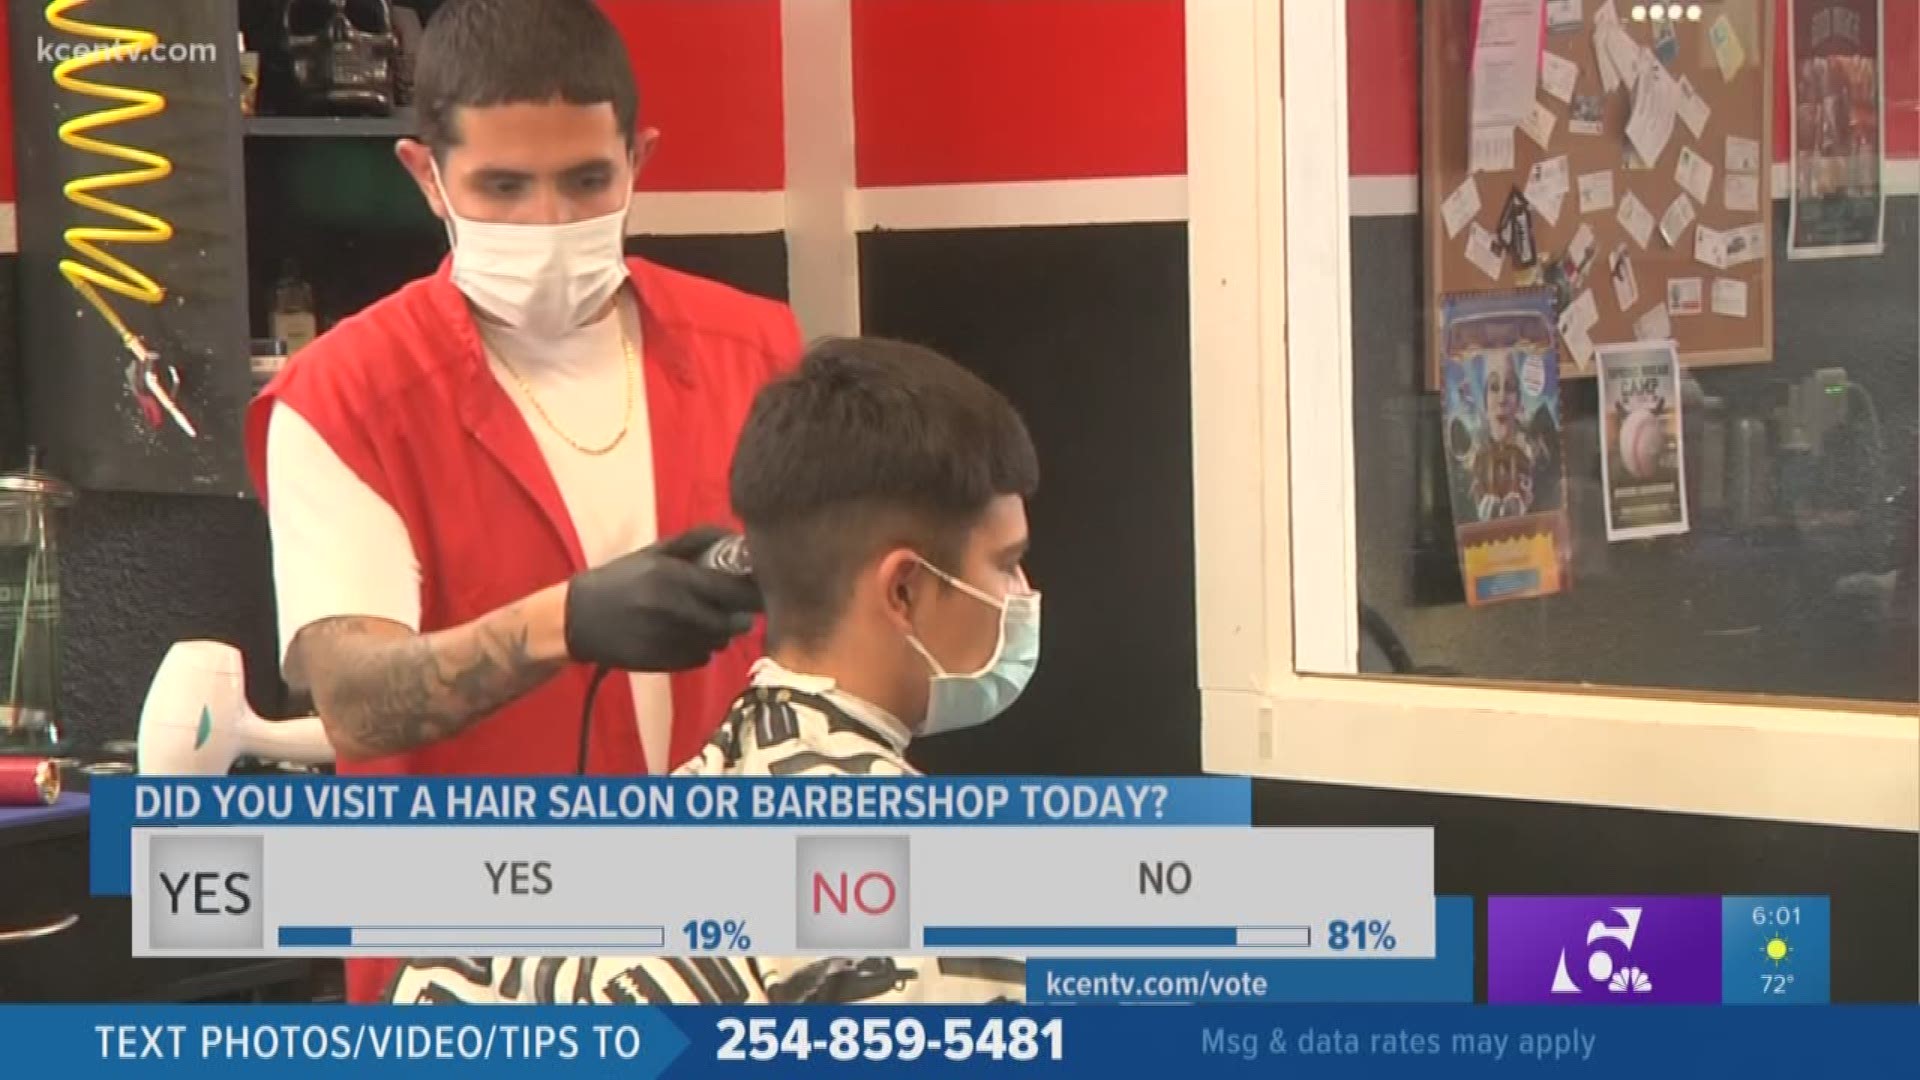 Lines were long at barbershops and salons Friday as they could officially reopen for business in Texas. However, some still chose to put off reopening.